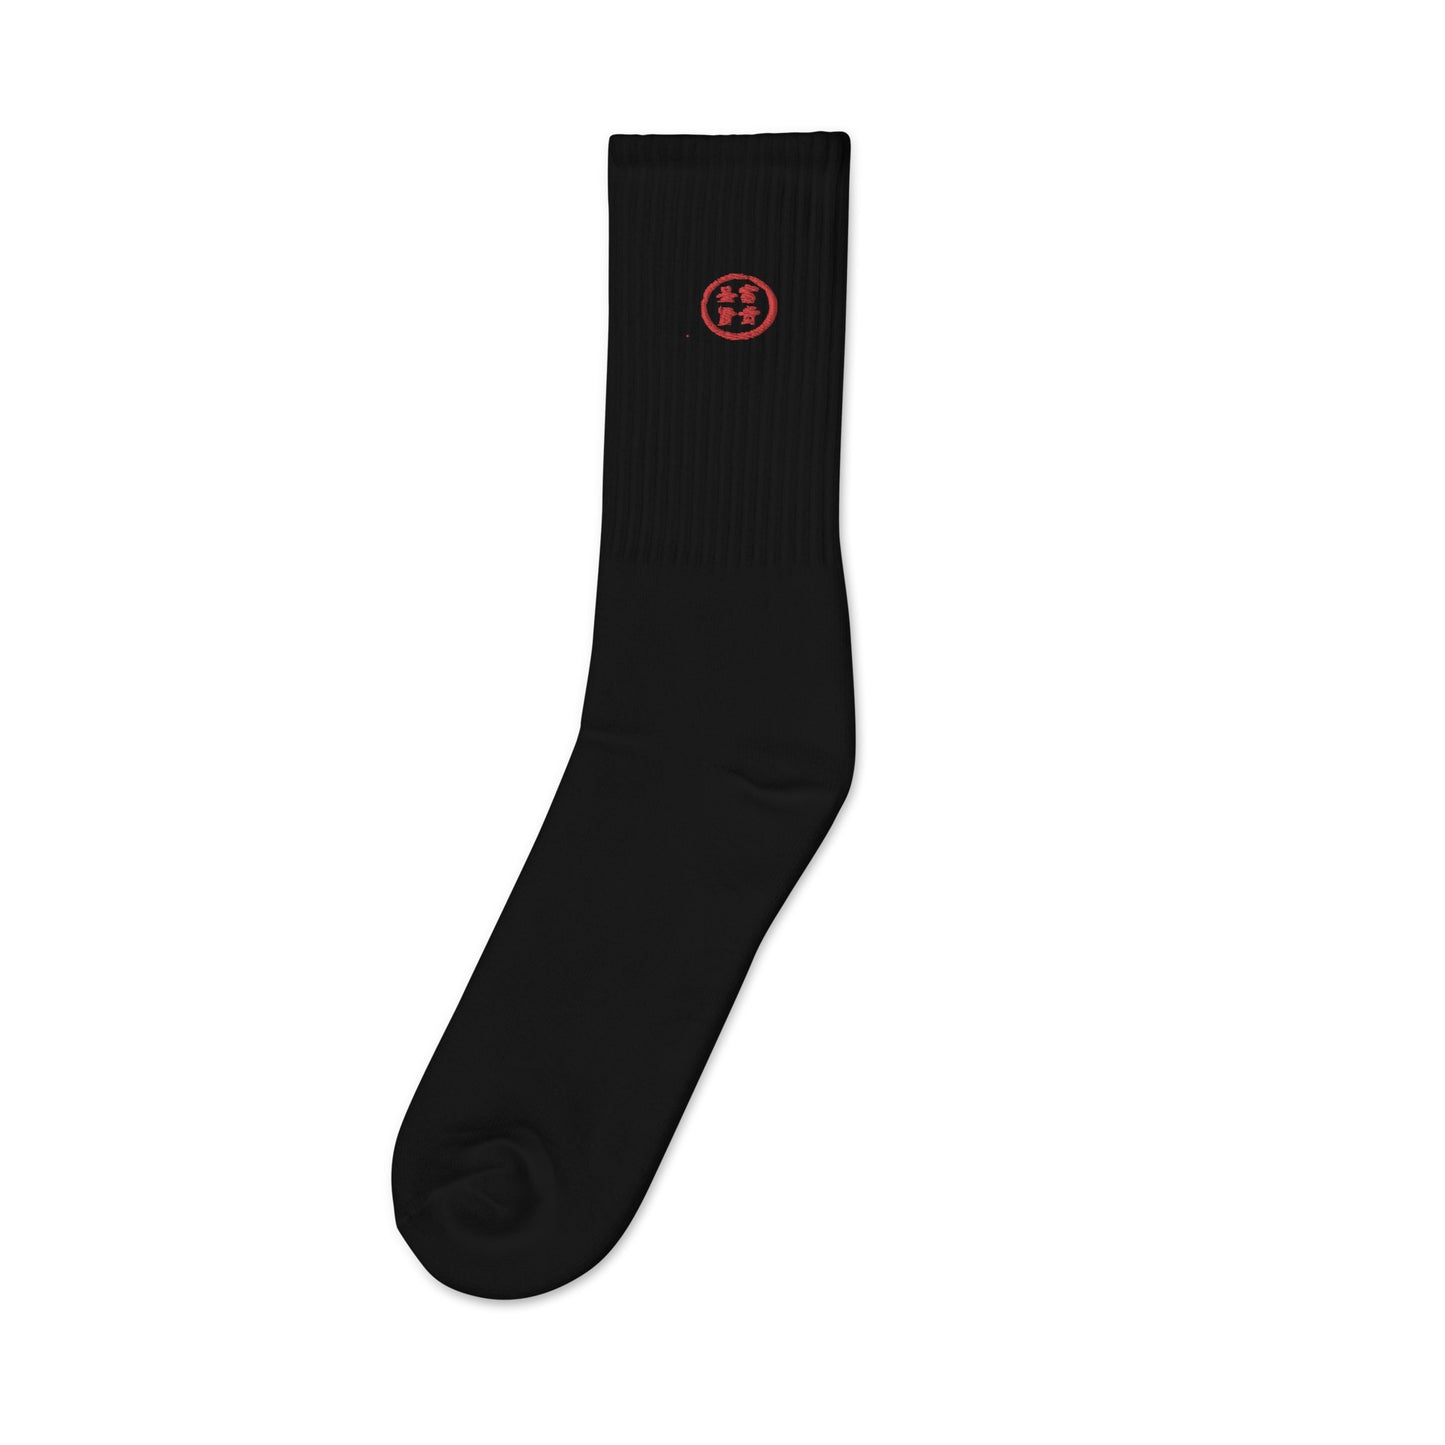 Tranquil Warrior Embroidered Socks